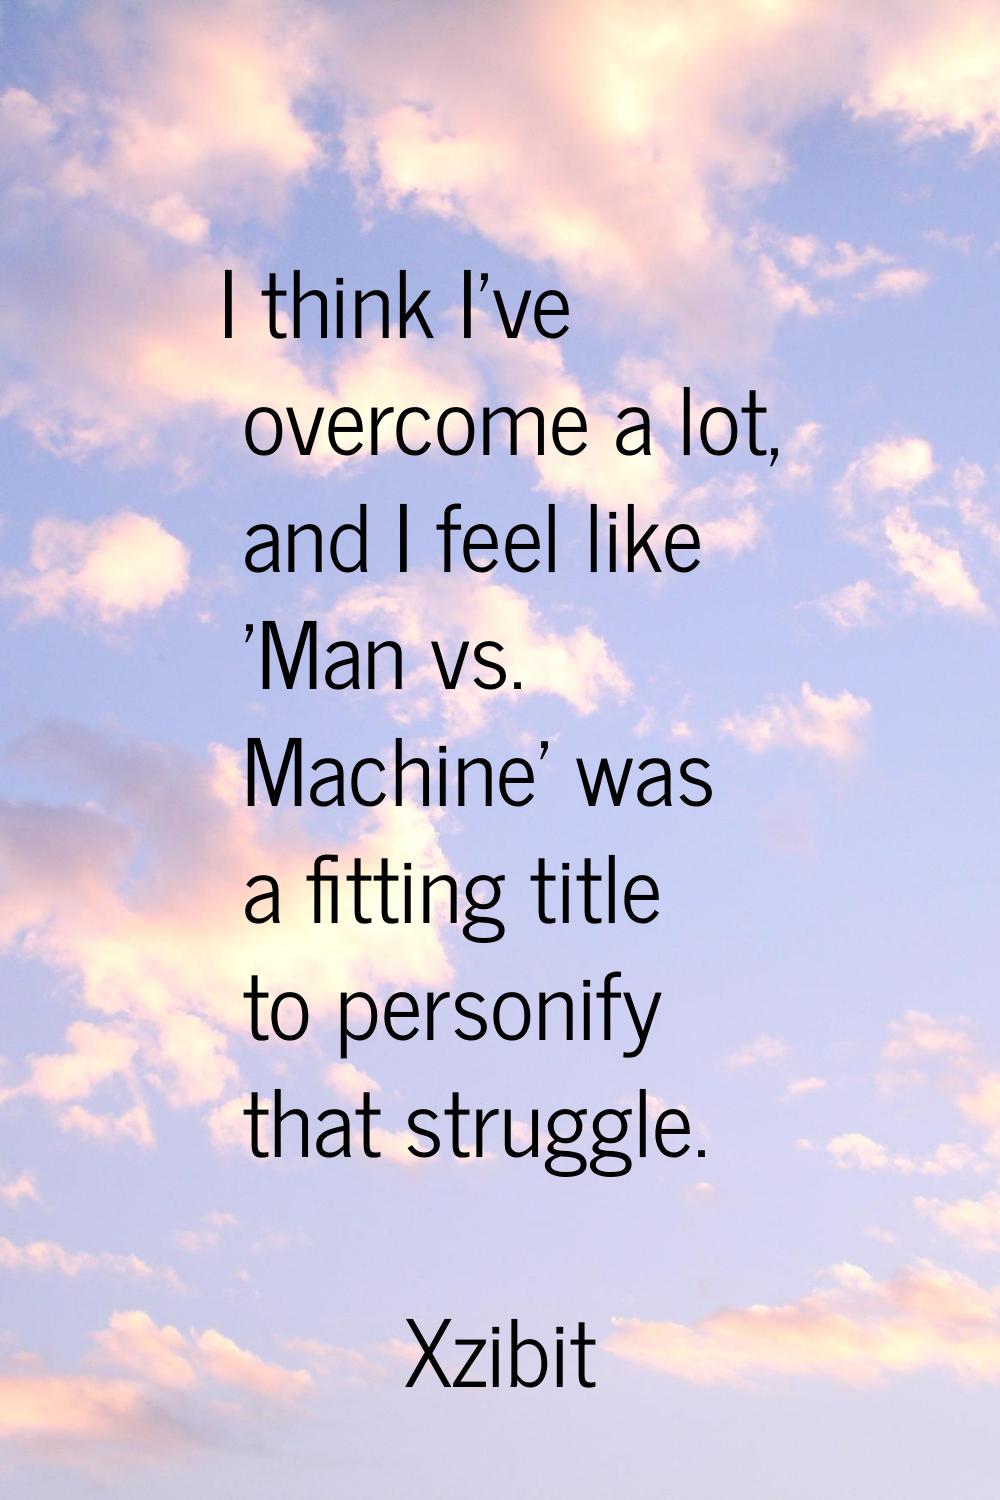 I think I've overcome a lot, and I feel like 'Man vs. Machine' was a fitting title to personify tha